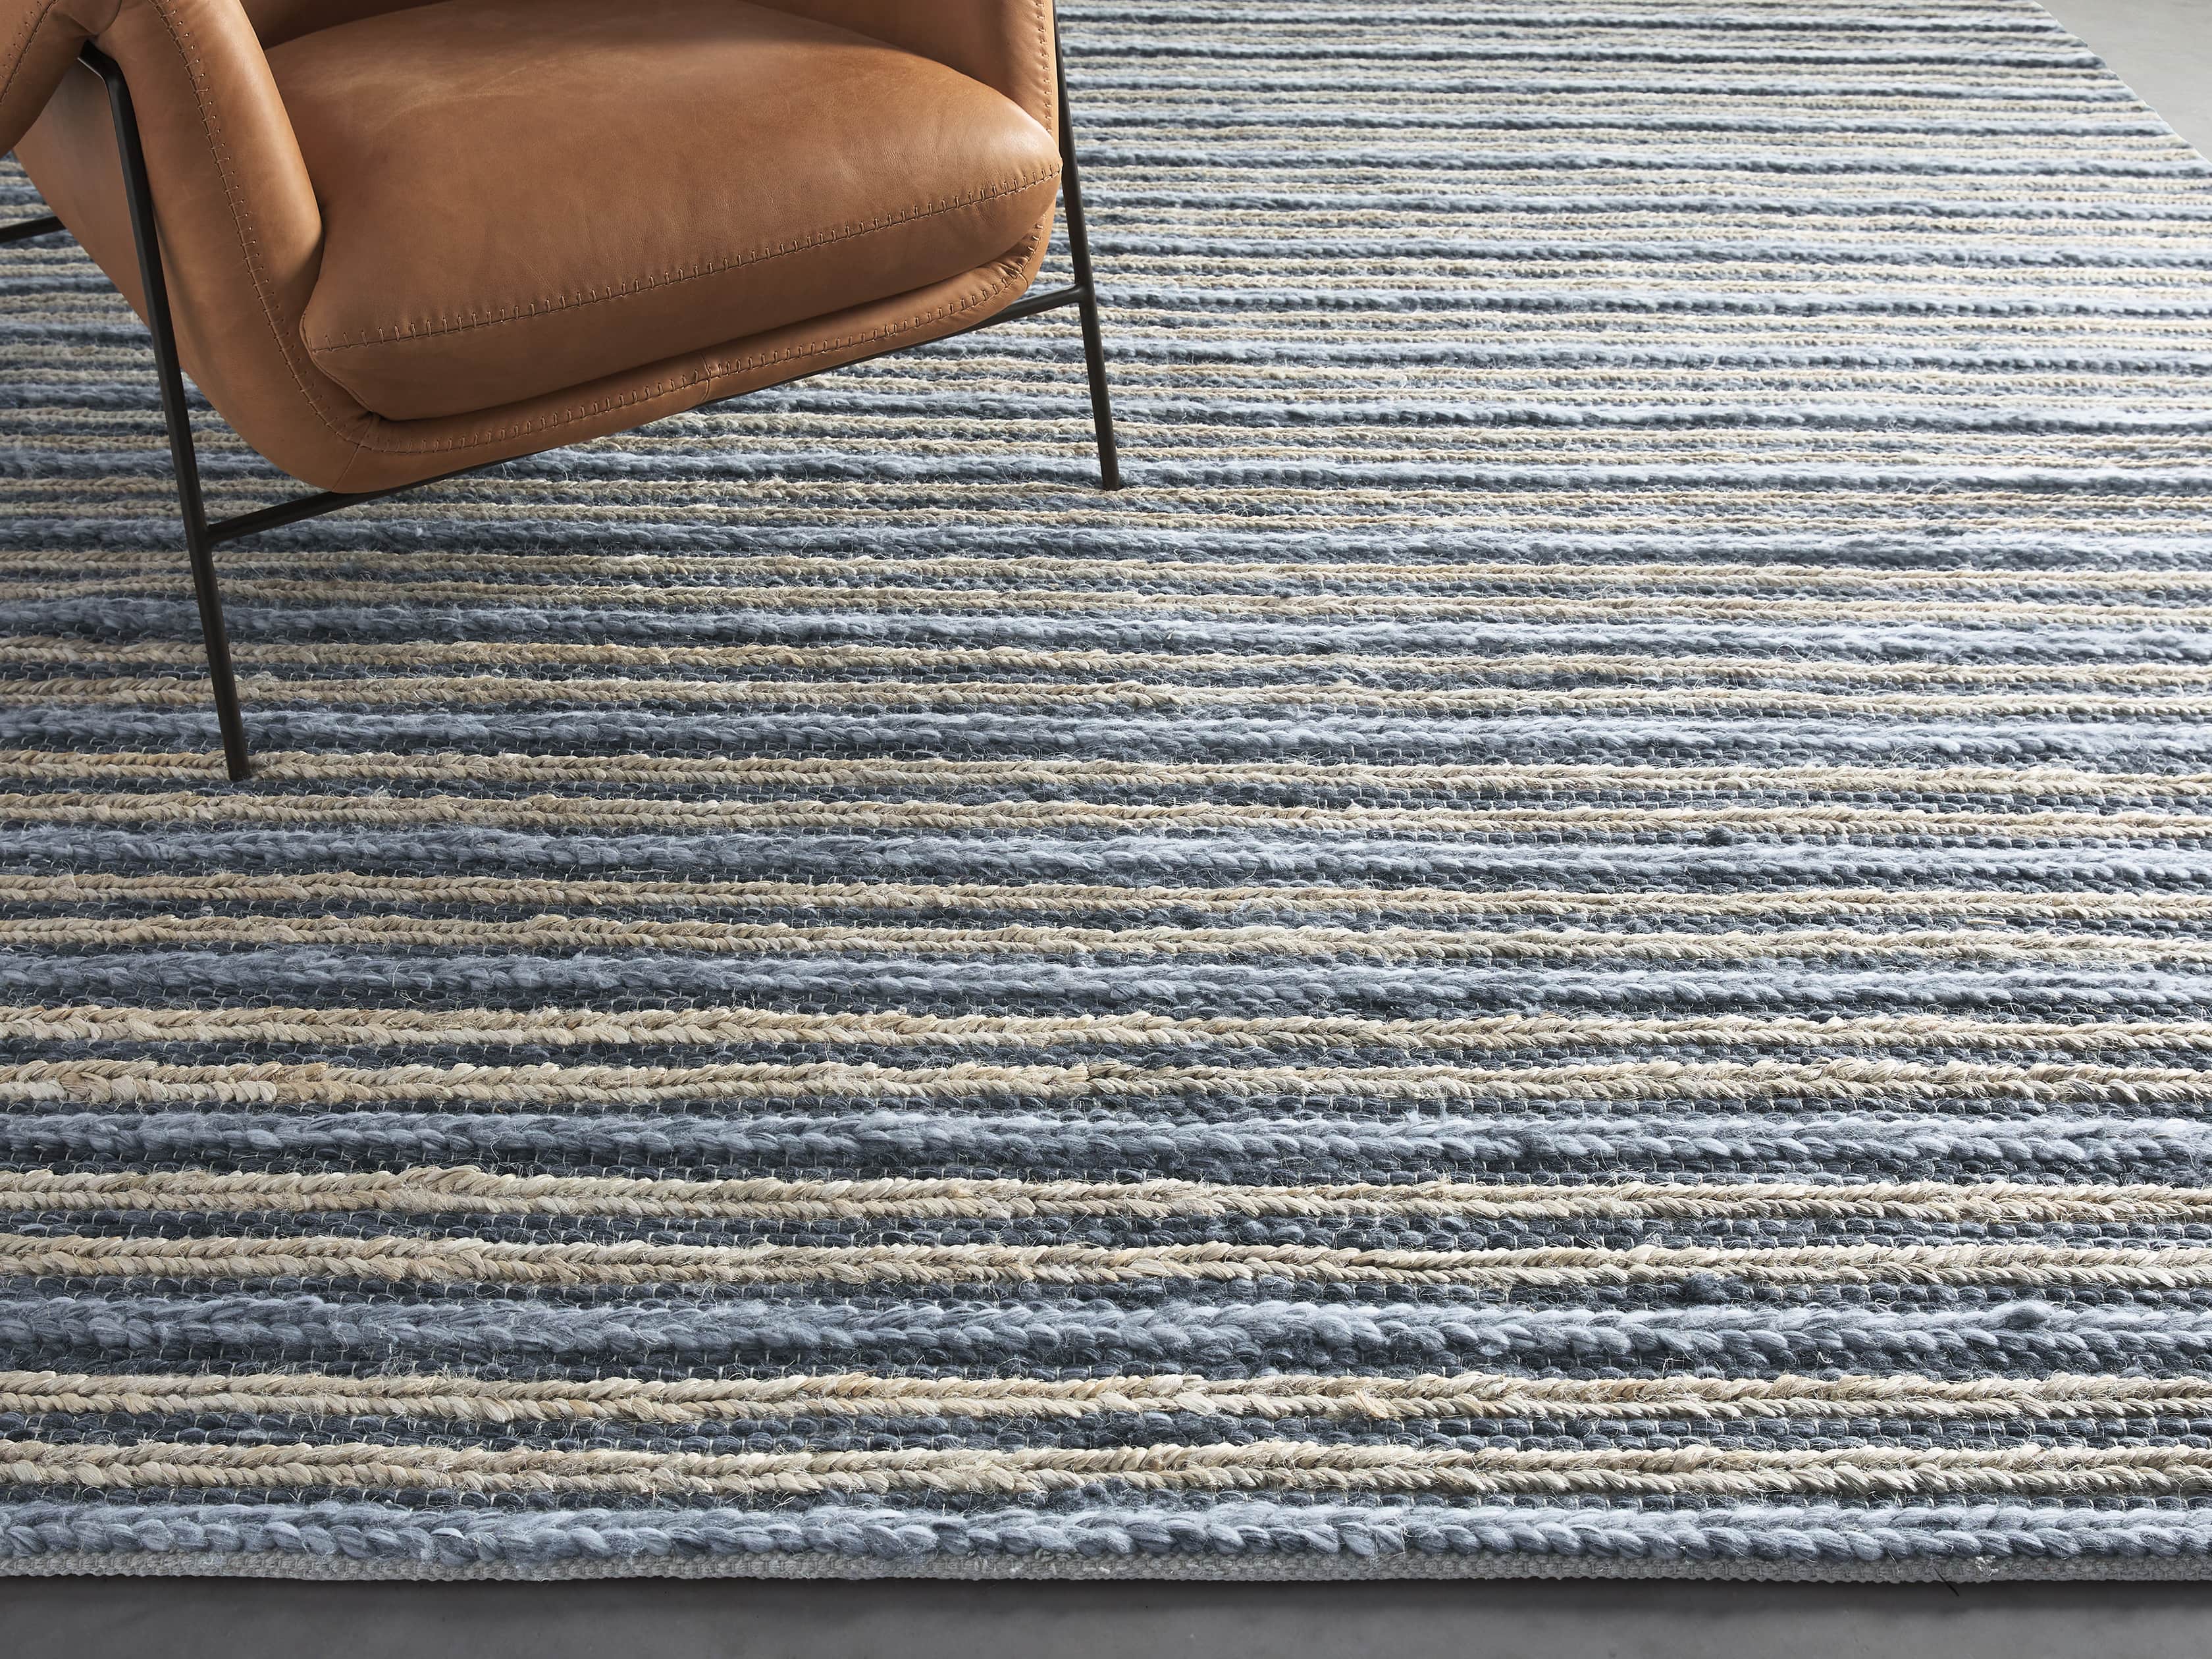 Cottager Handwoven Rug Arhaus, Rugs And Home